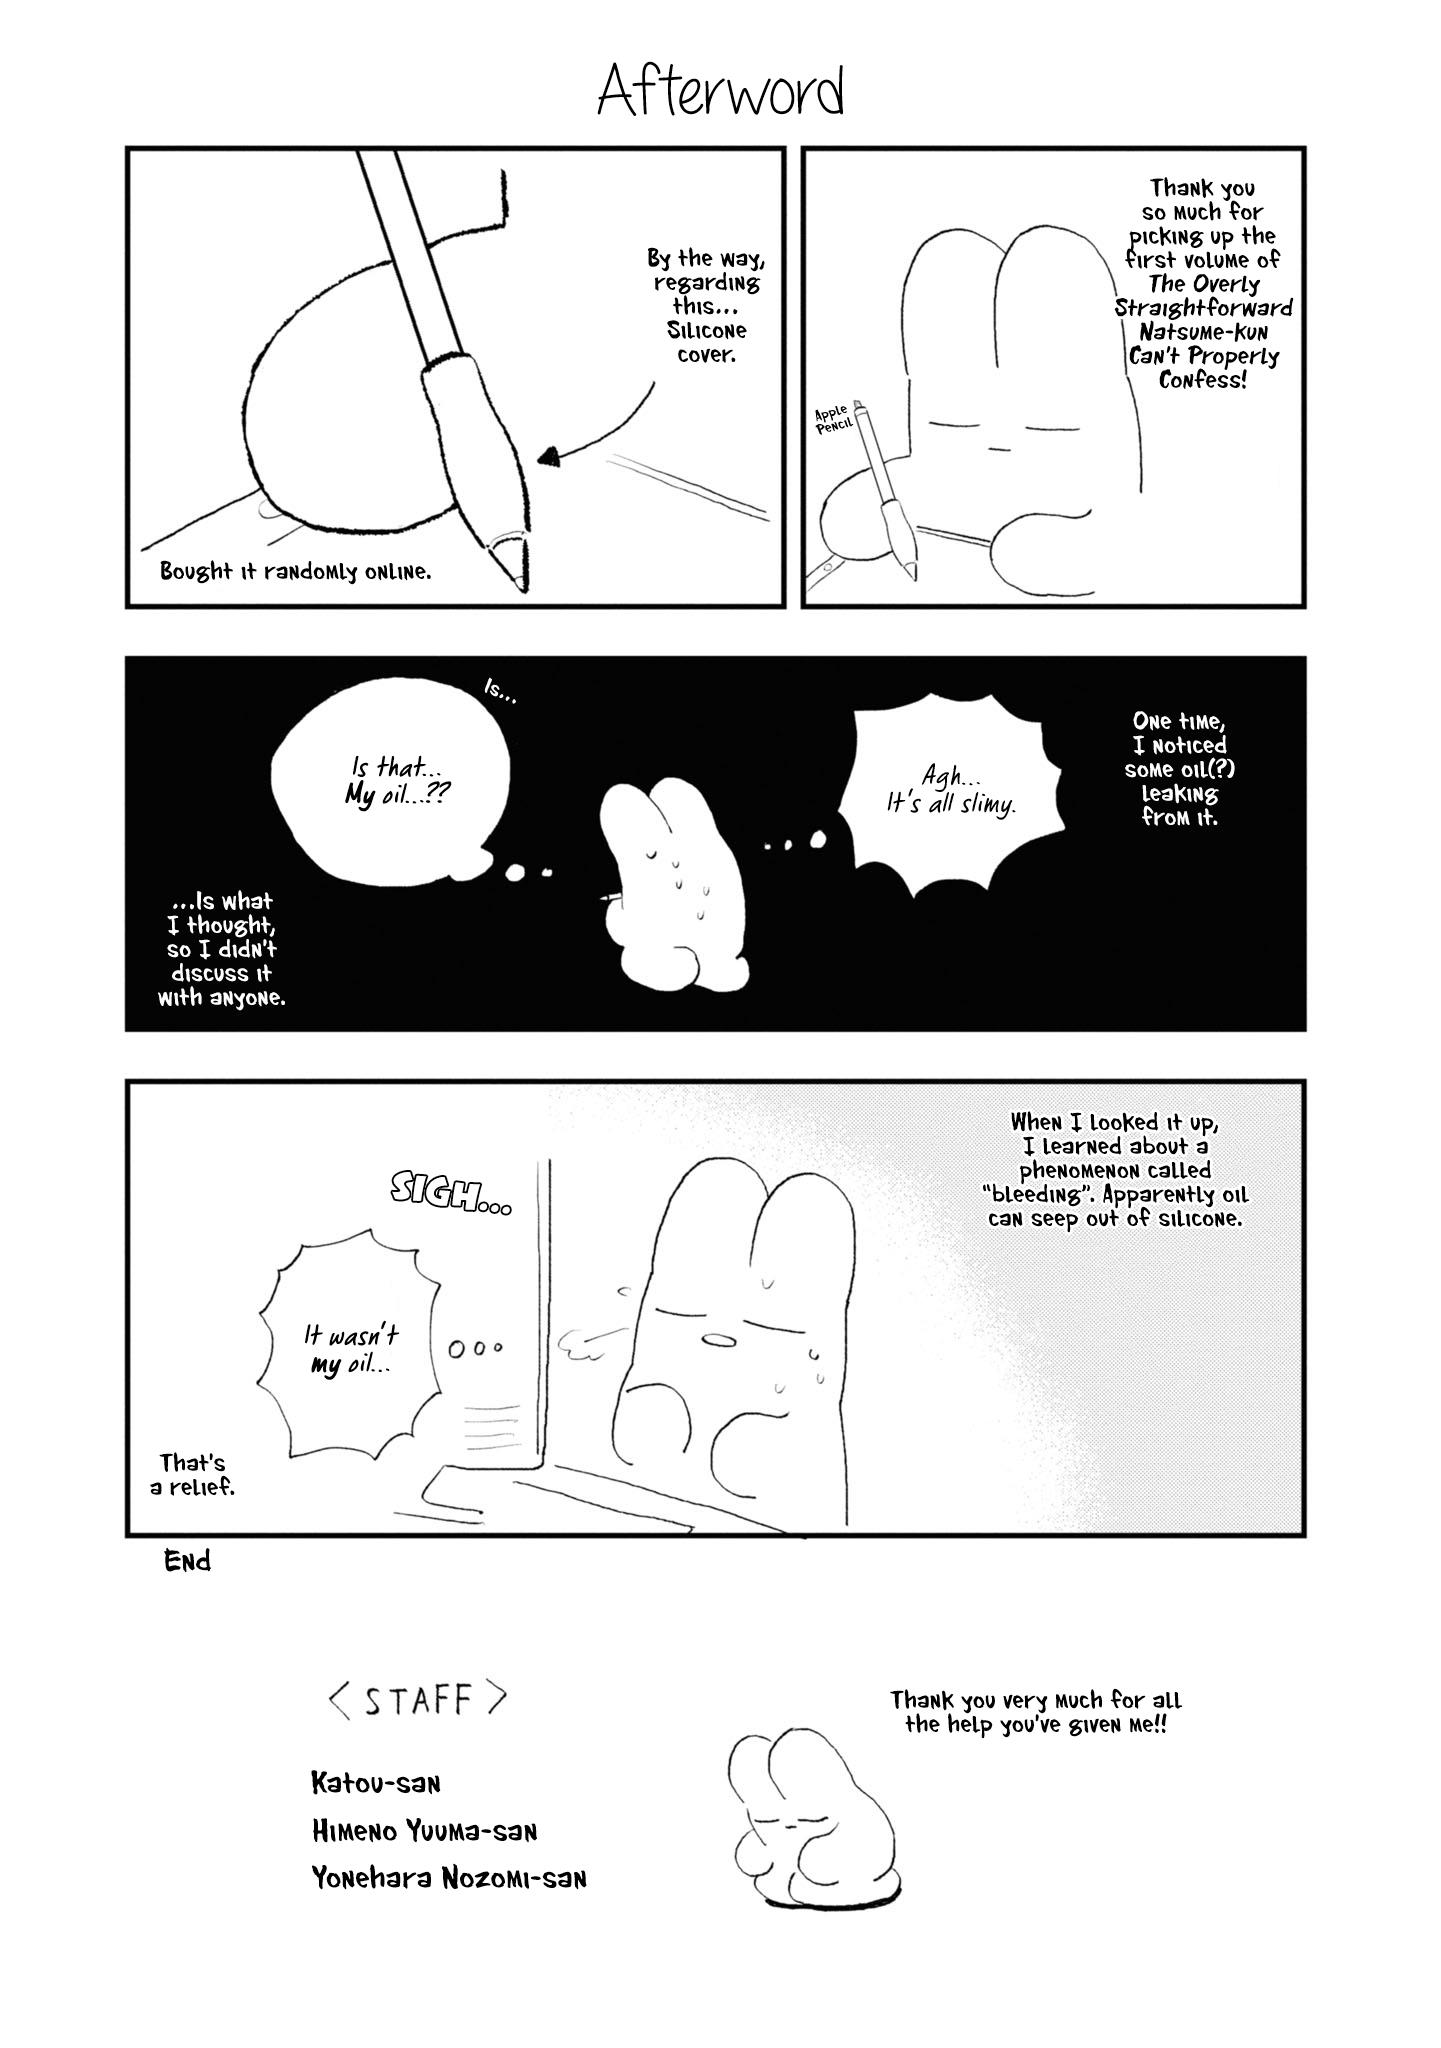 The Overly Straightforward Natsume-Kun Can't Properly Confess Chapter 12.5 #1